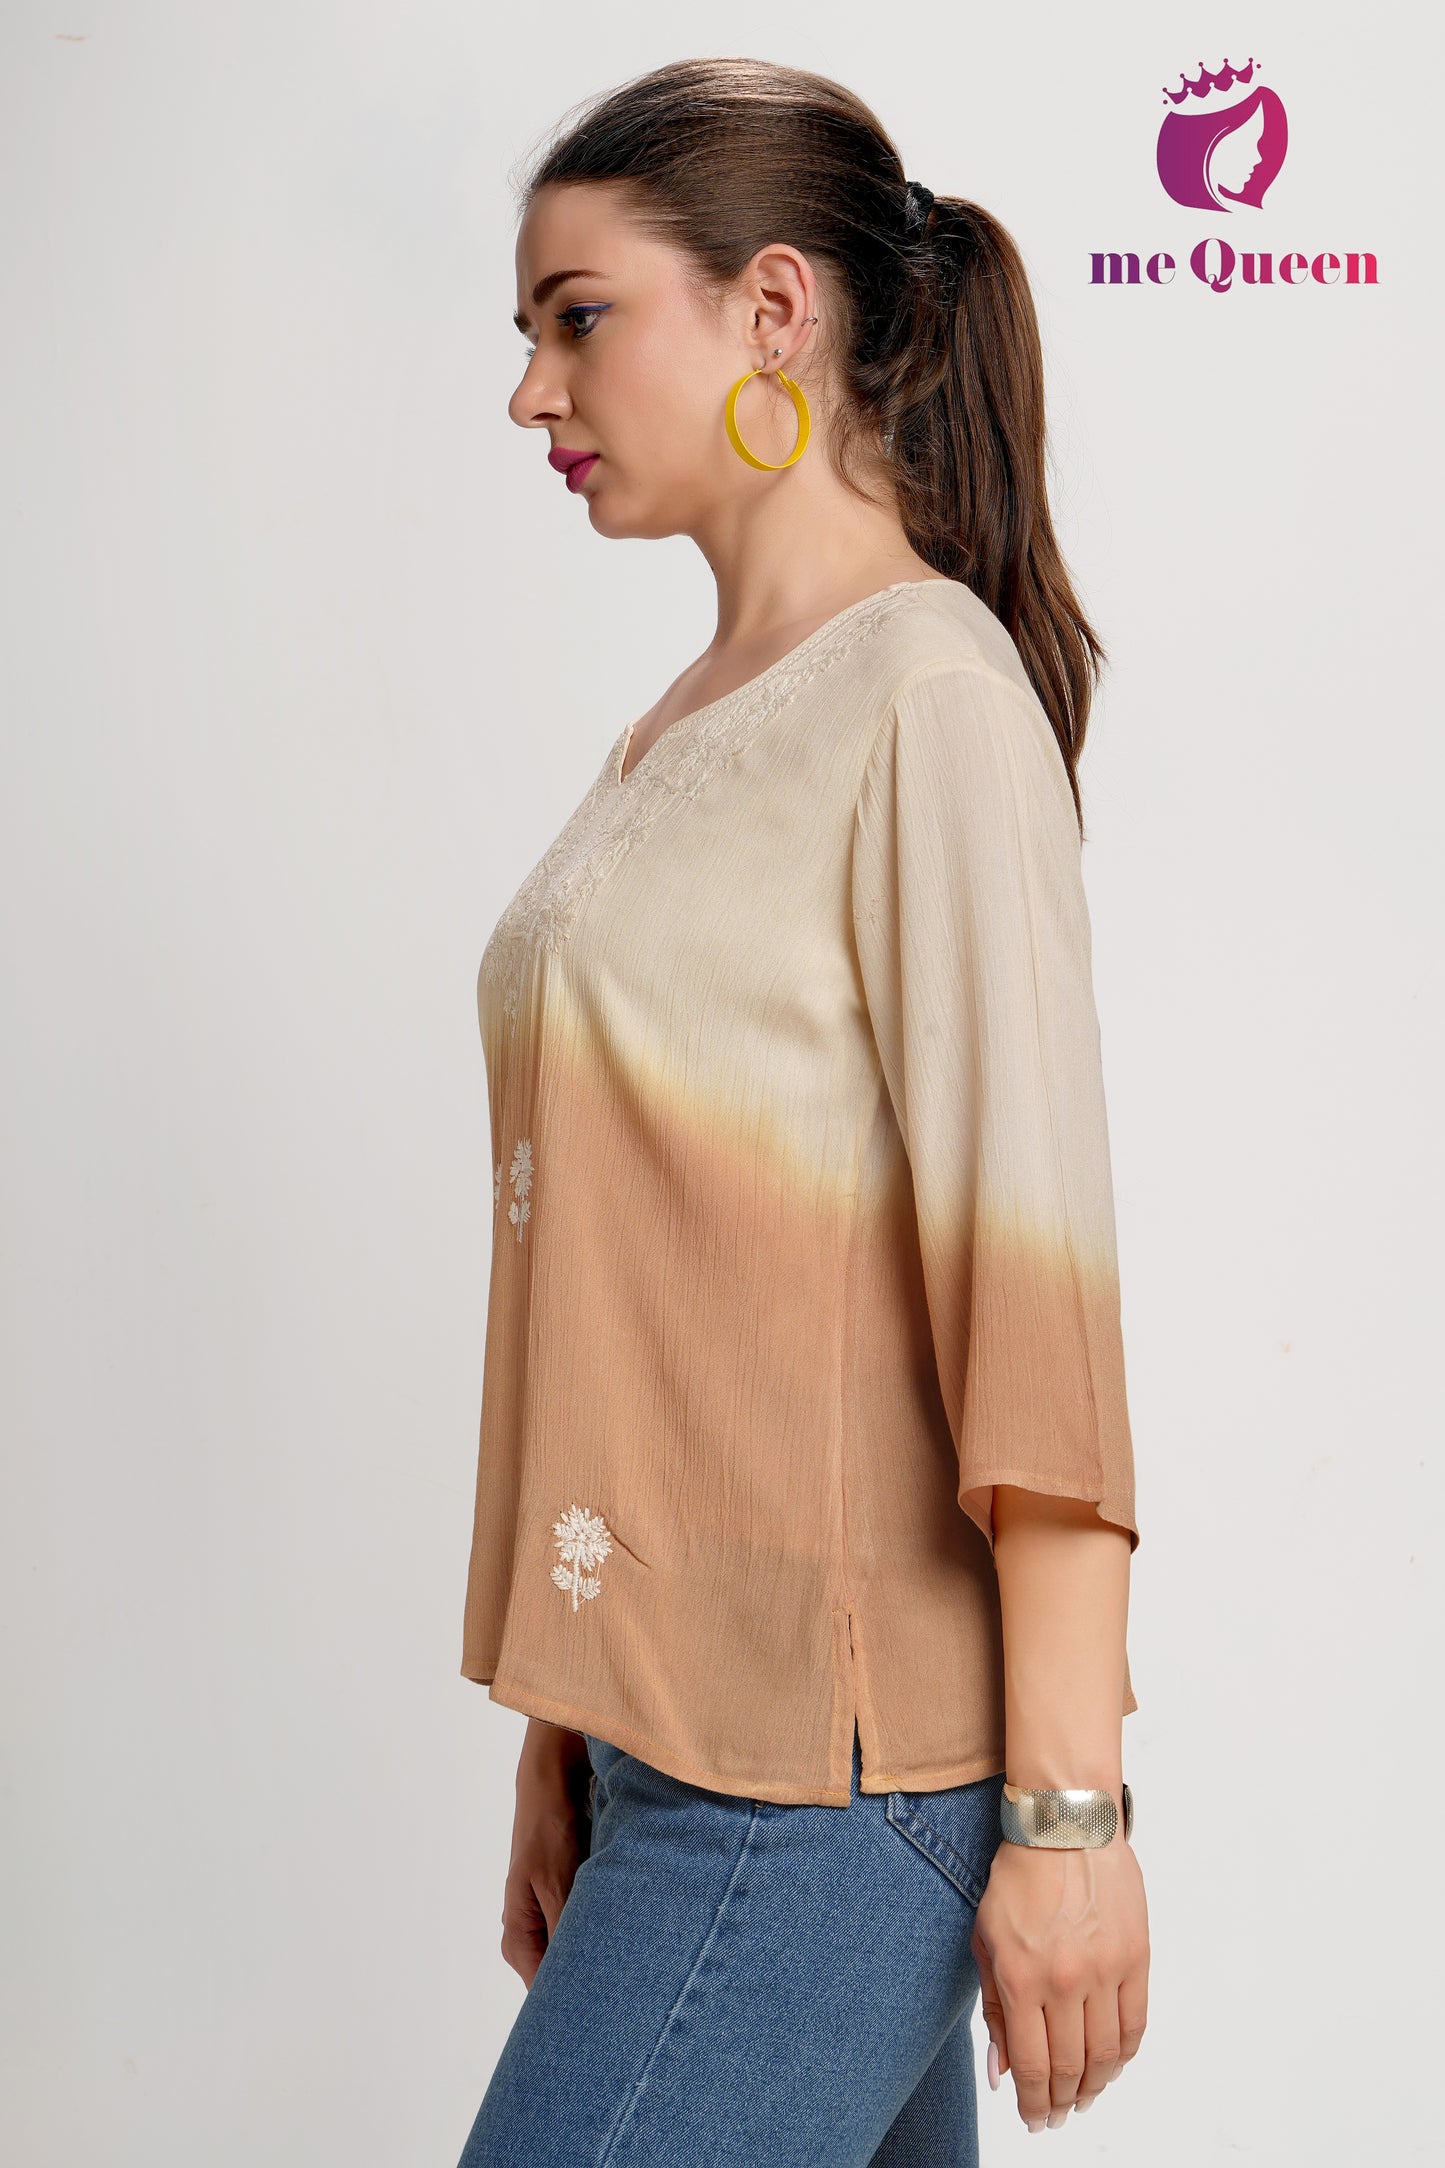 MeQueen's Ombre Top with Delicate Embroidery